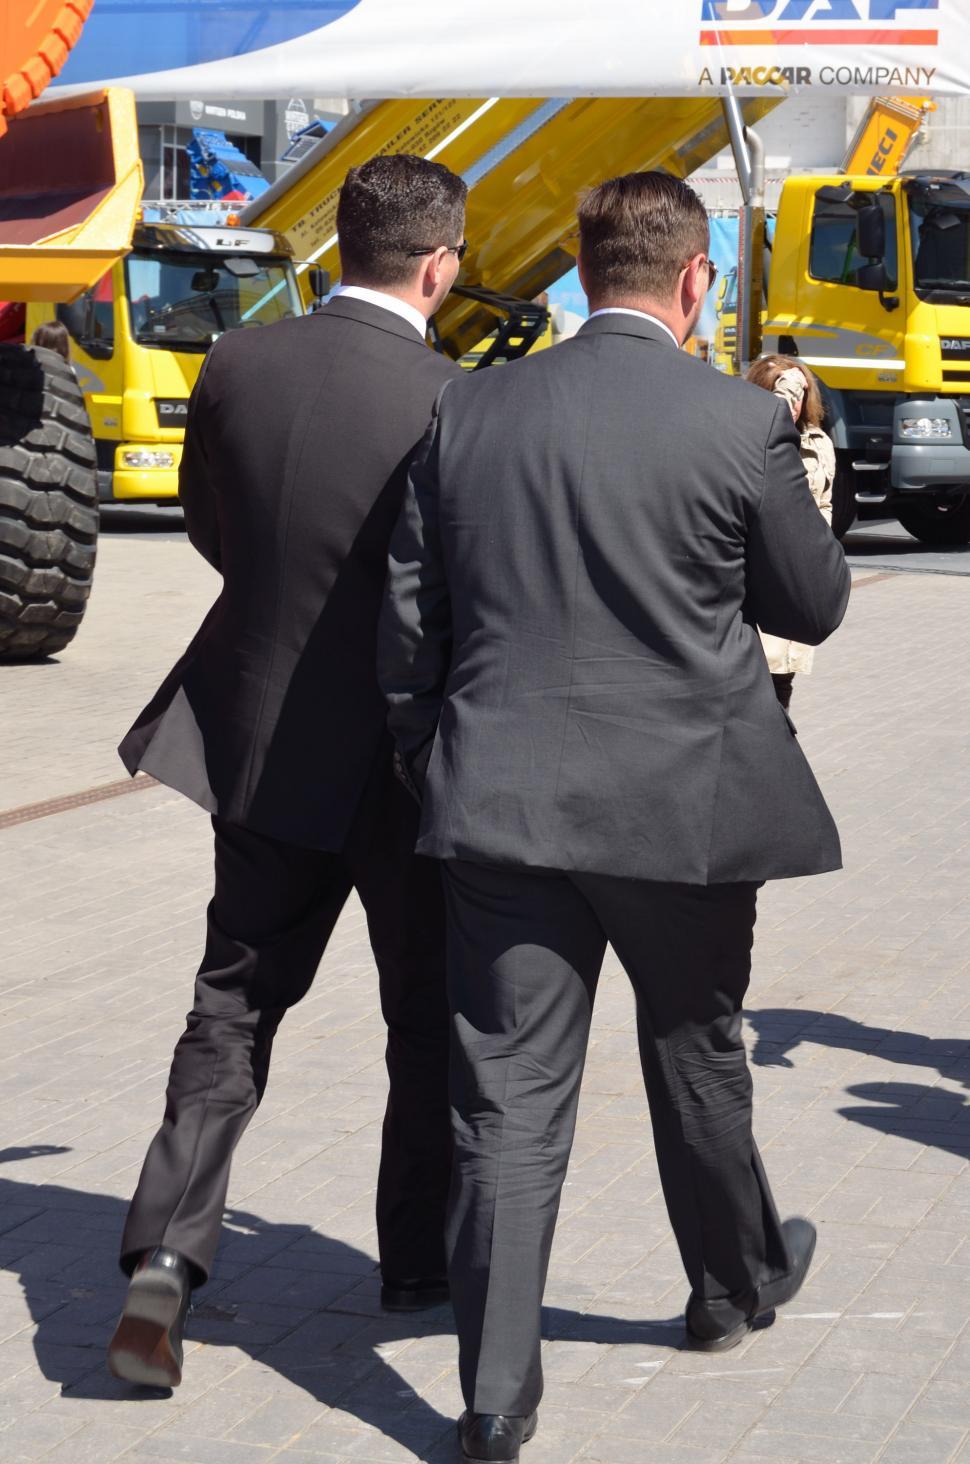 Free Image of Two Men in Suits Walking Towards a Yellow Truck 